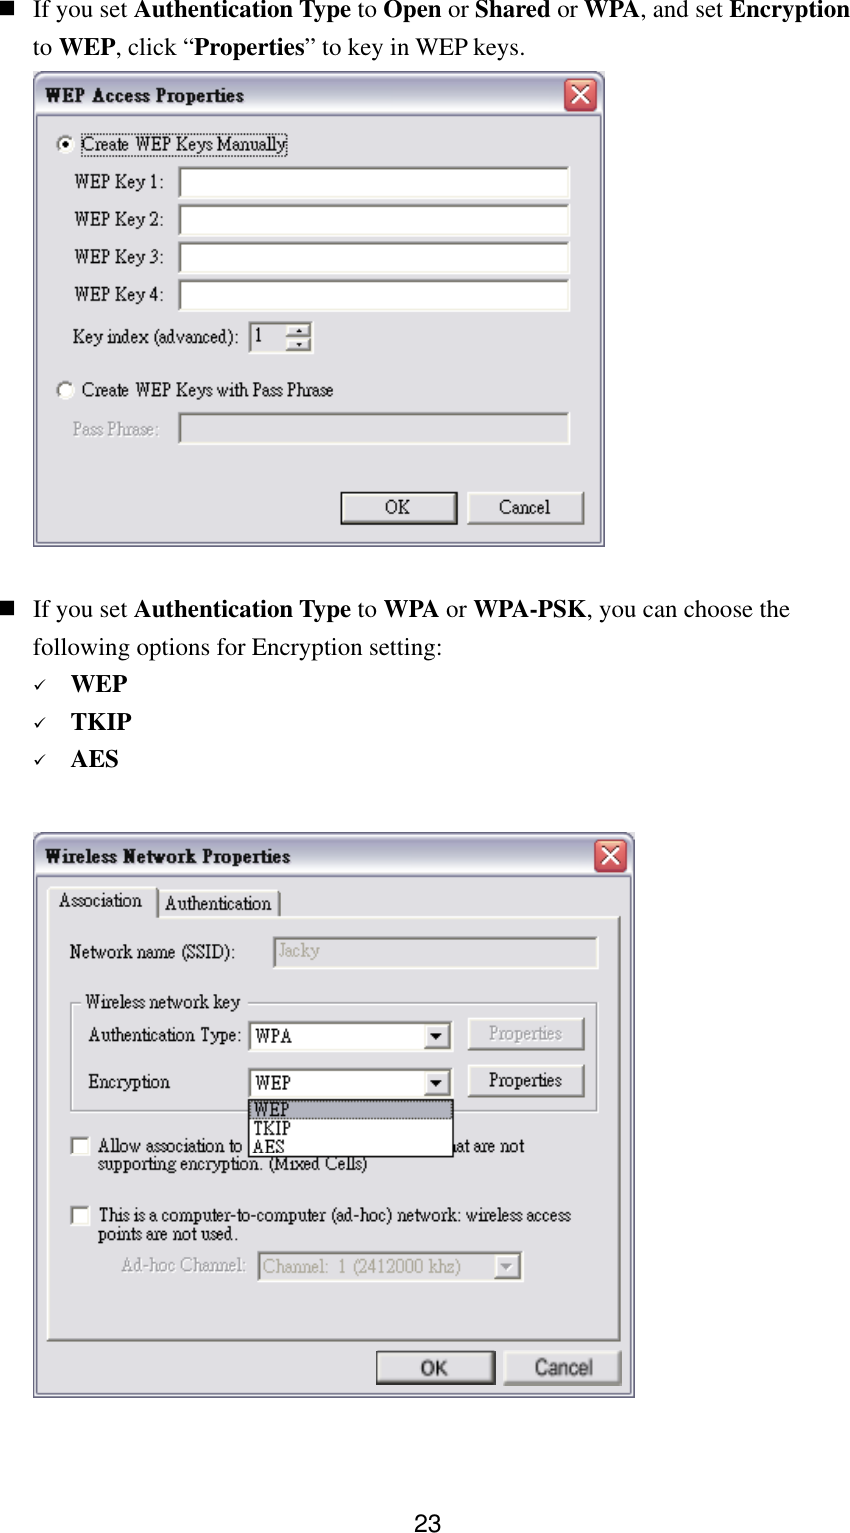  23 If you set Authentication Type to Open or Shared or WPA, and set Encryption to WEP, click “Properties” to key in WEP keys.    If you set Authentication Type to WPA or WPA-PSK, you can choose the following options for Encryption setting:   WEP   TKIP   AES    